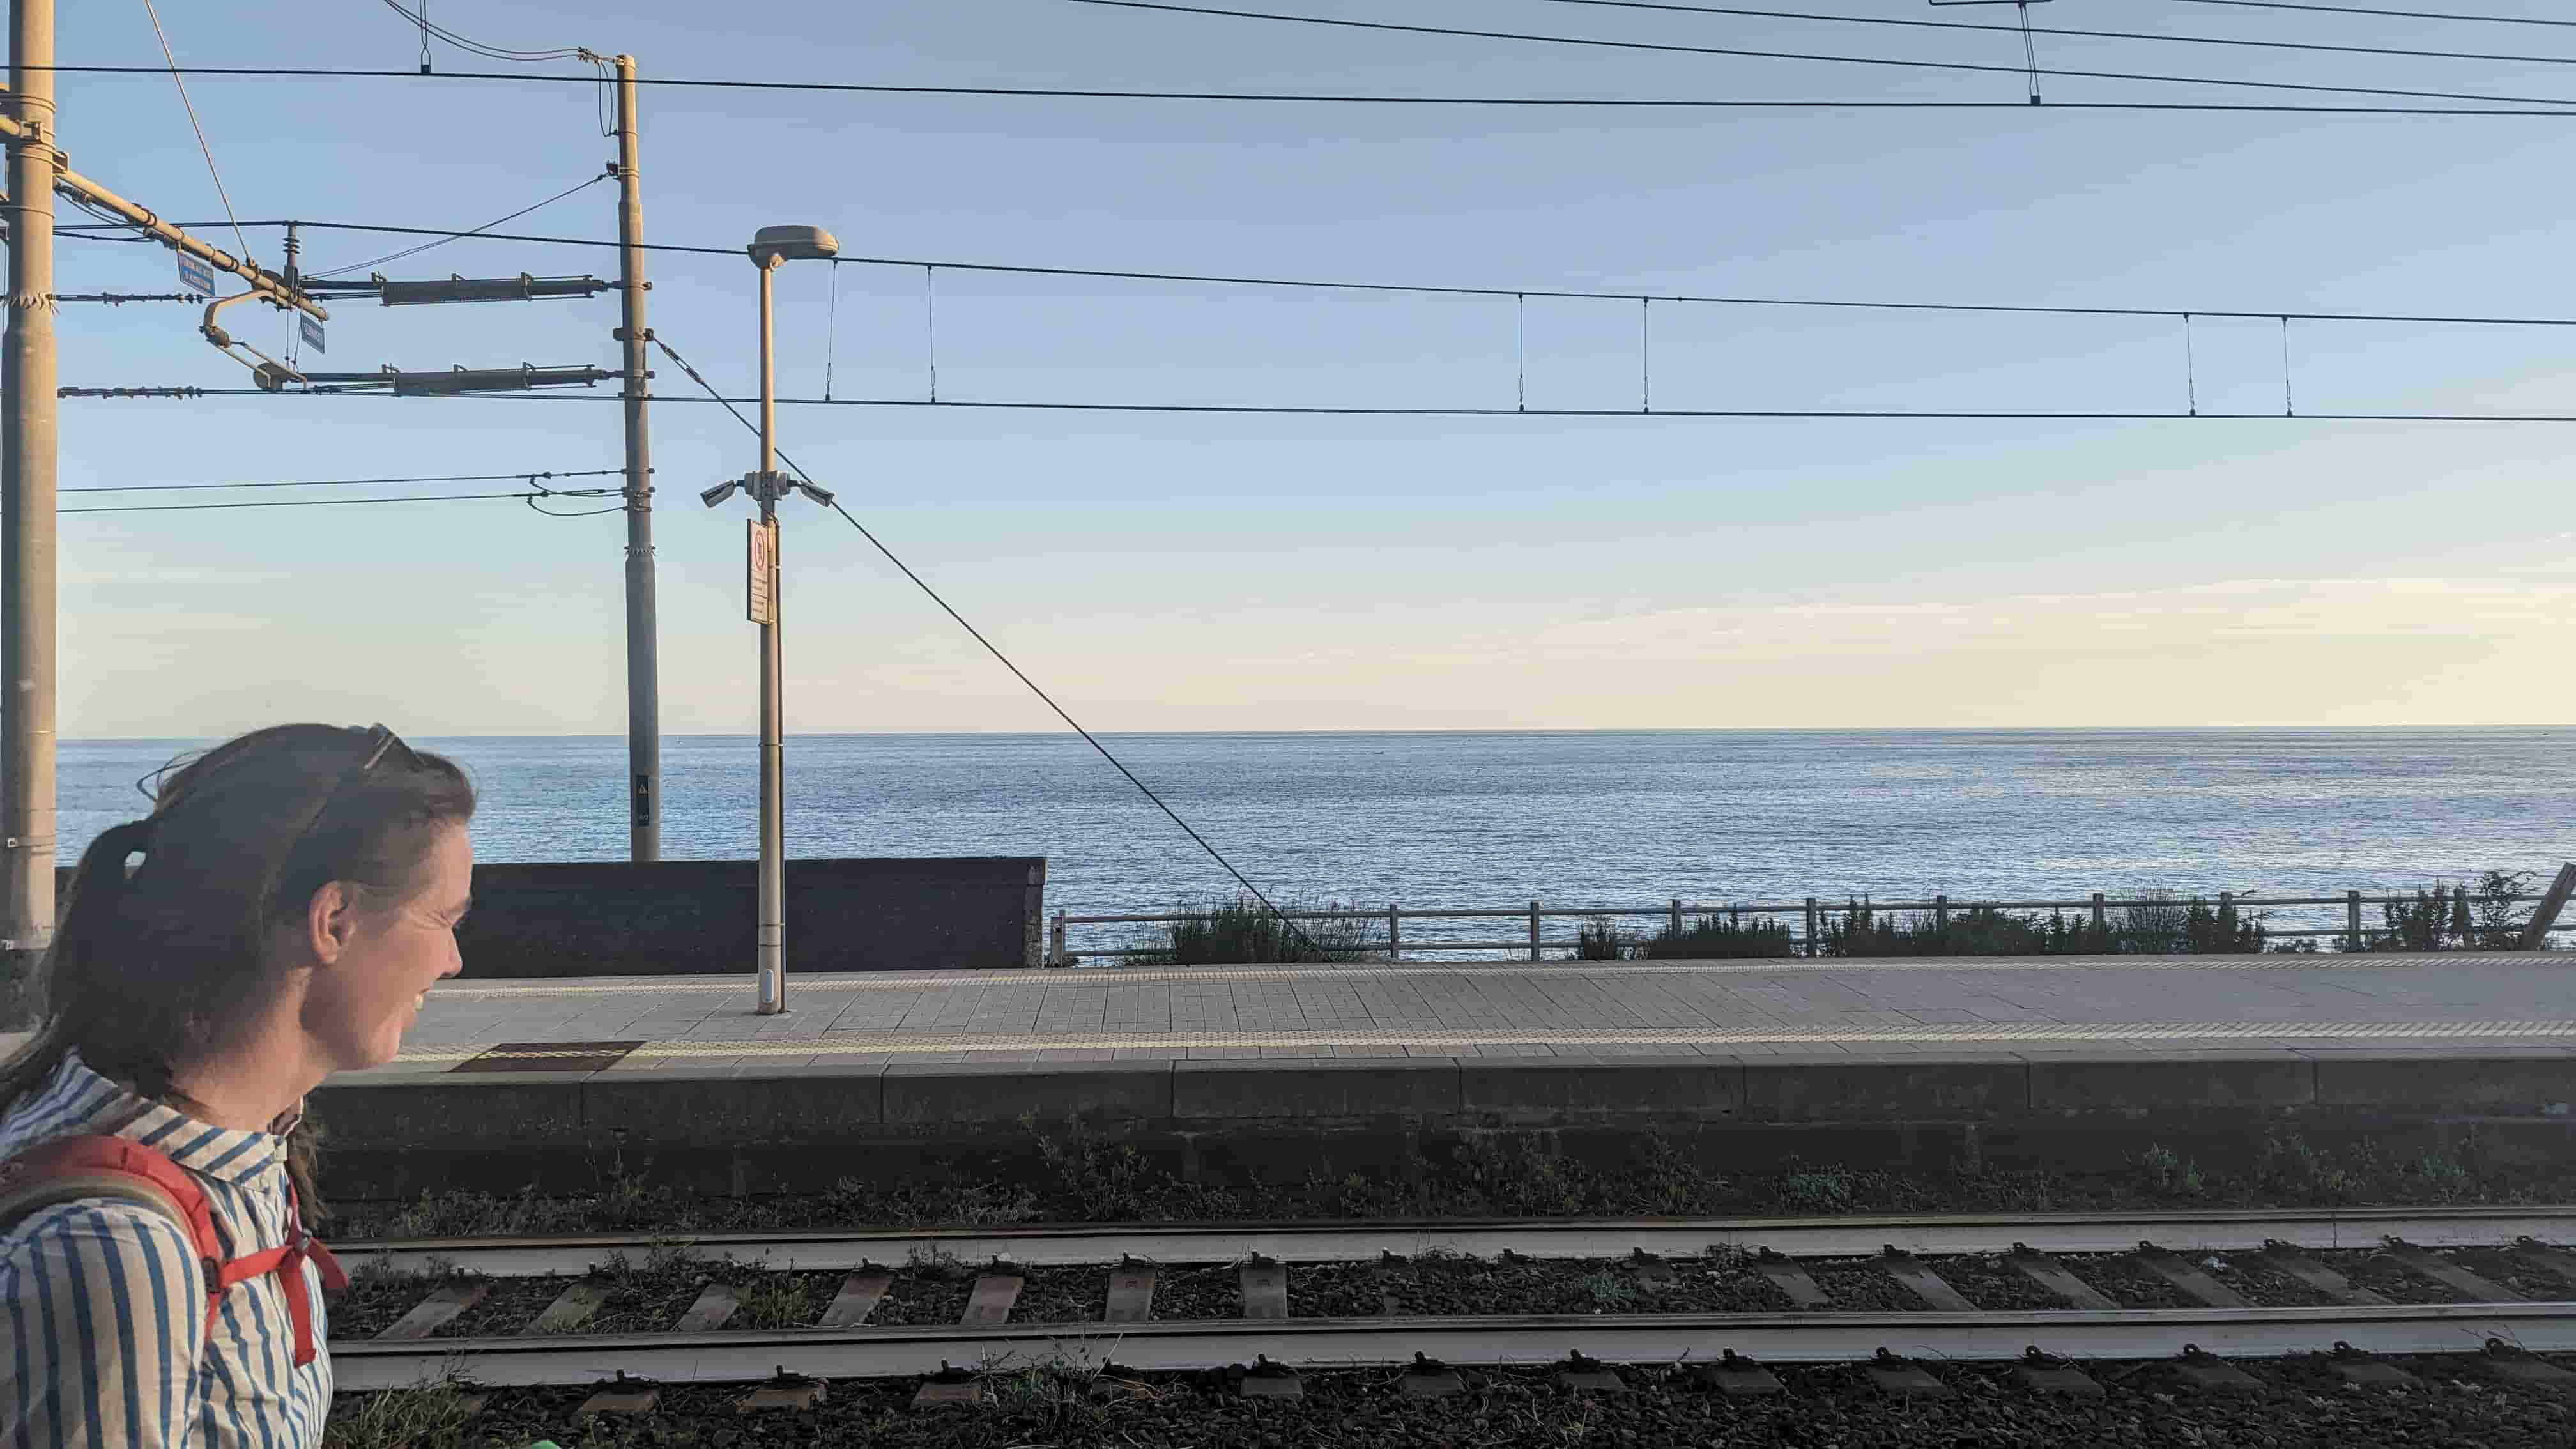 View from the train window on a trip from La Spezia to Levanto